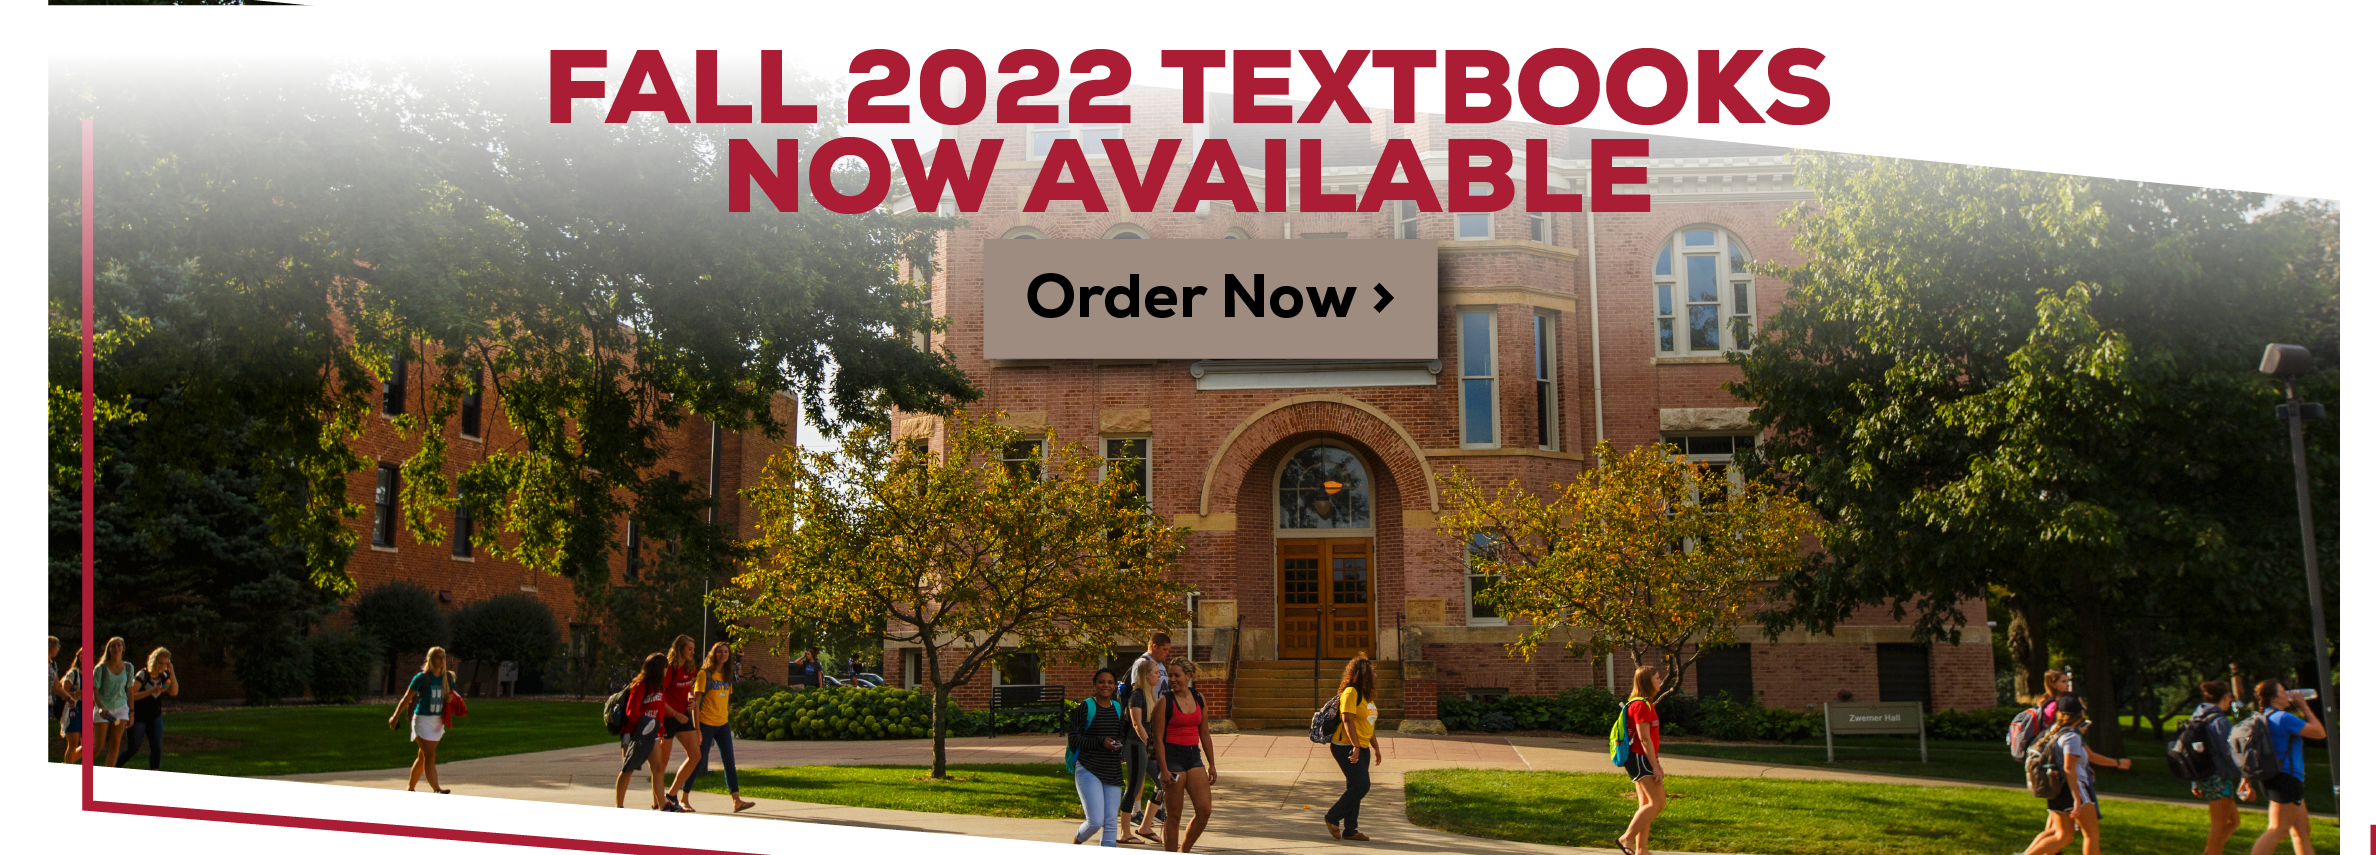 Fall 2022 Textbooks Now Available. Order now.